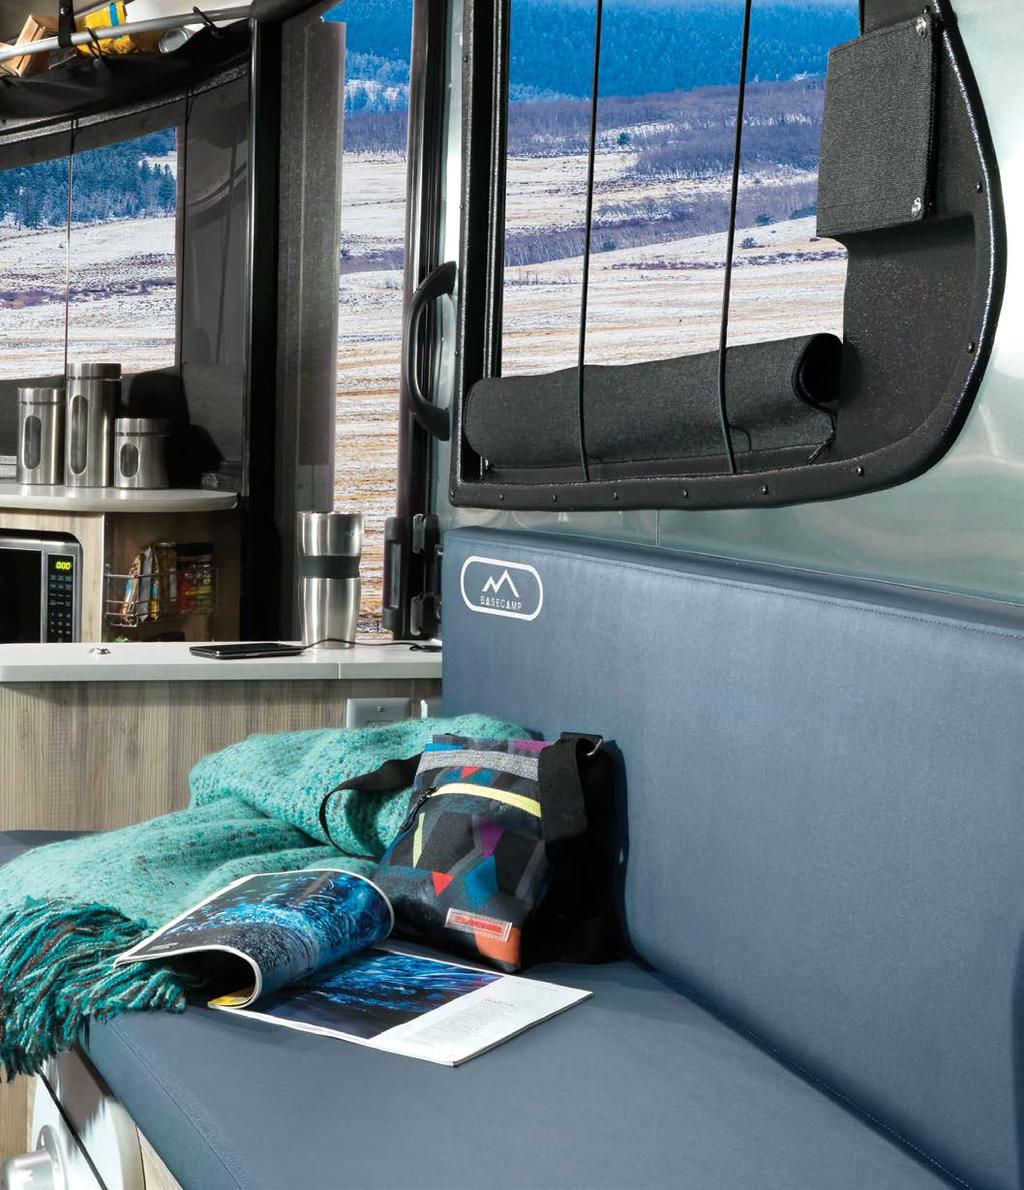 The 2019 Airstream Basecamp is a sturdy, hypnotically beautiful